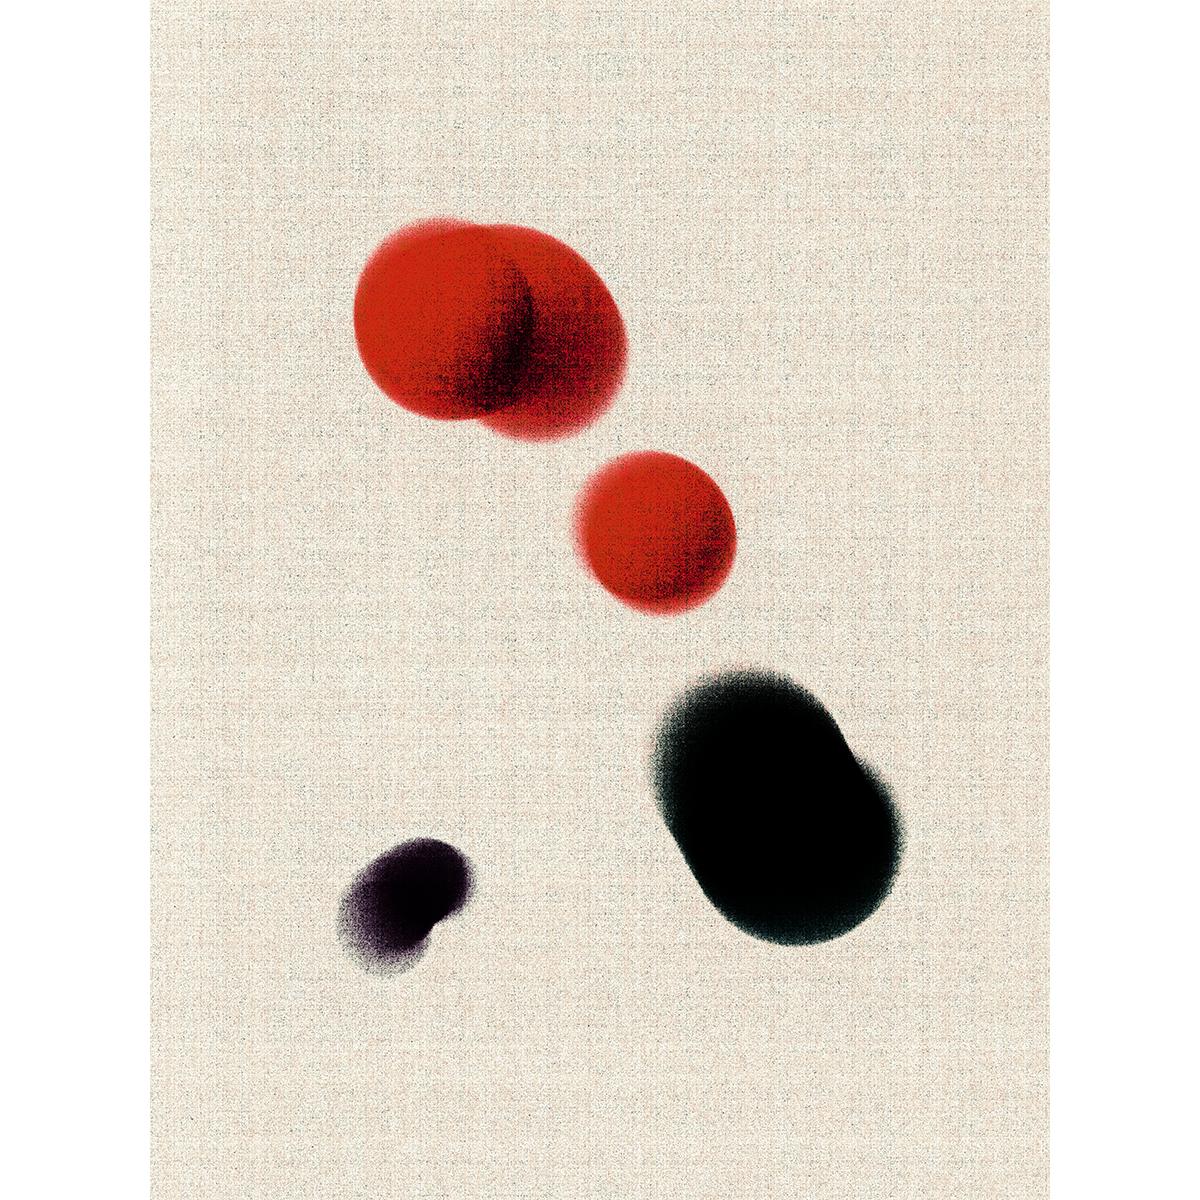 Luuk de Haan Color Photograph - Red, white, black, abstraction, photography,  edition of one, Ukiyo #11